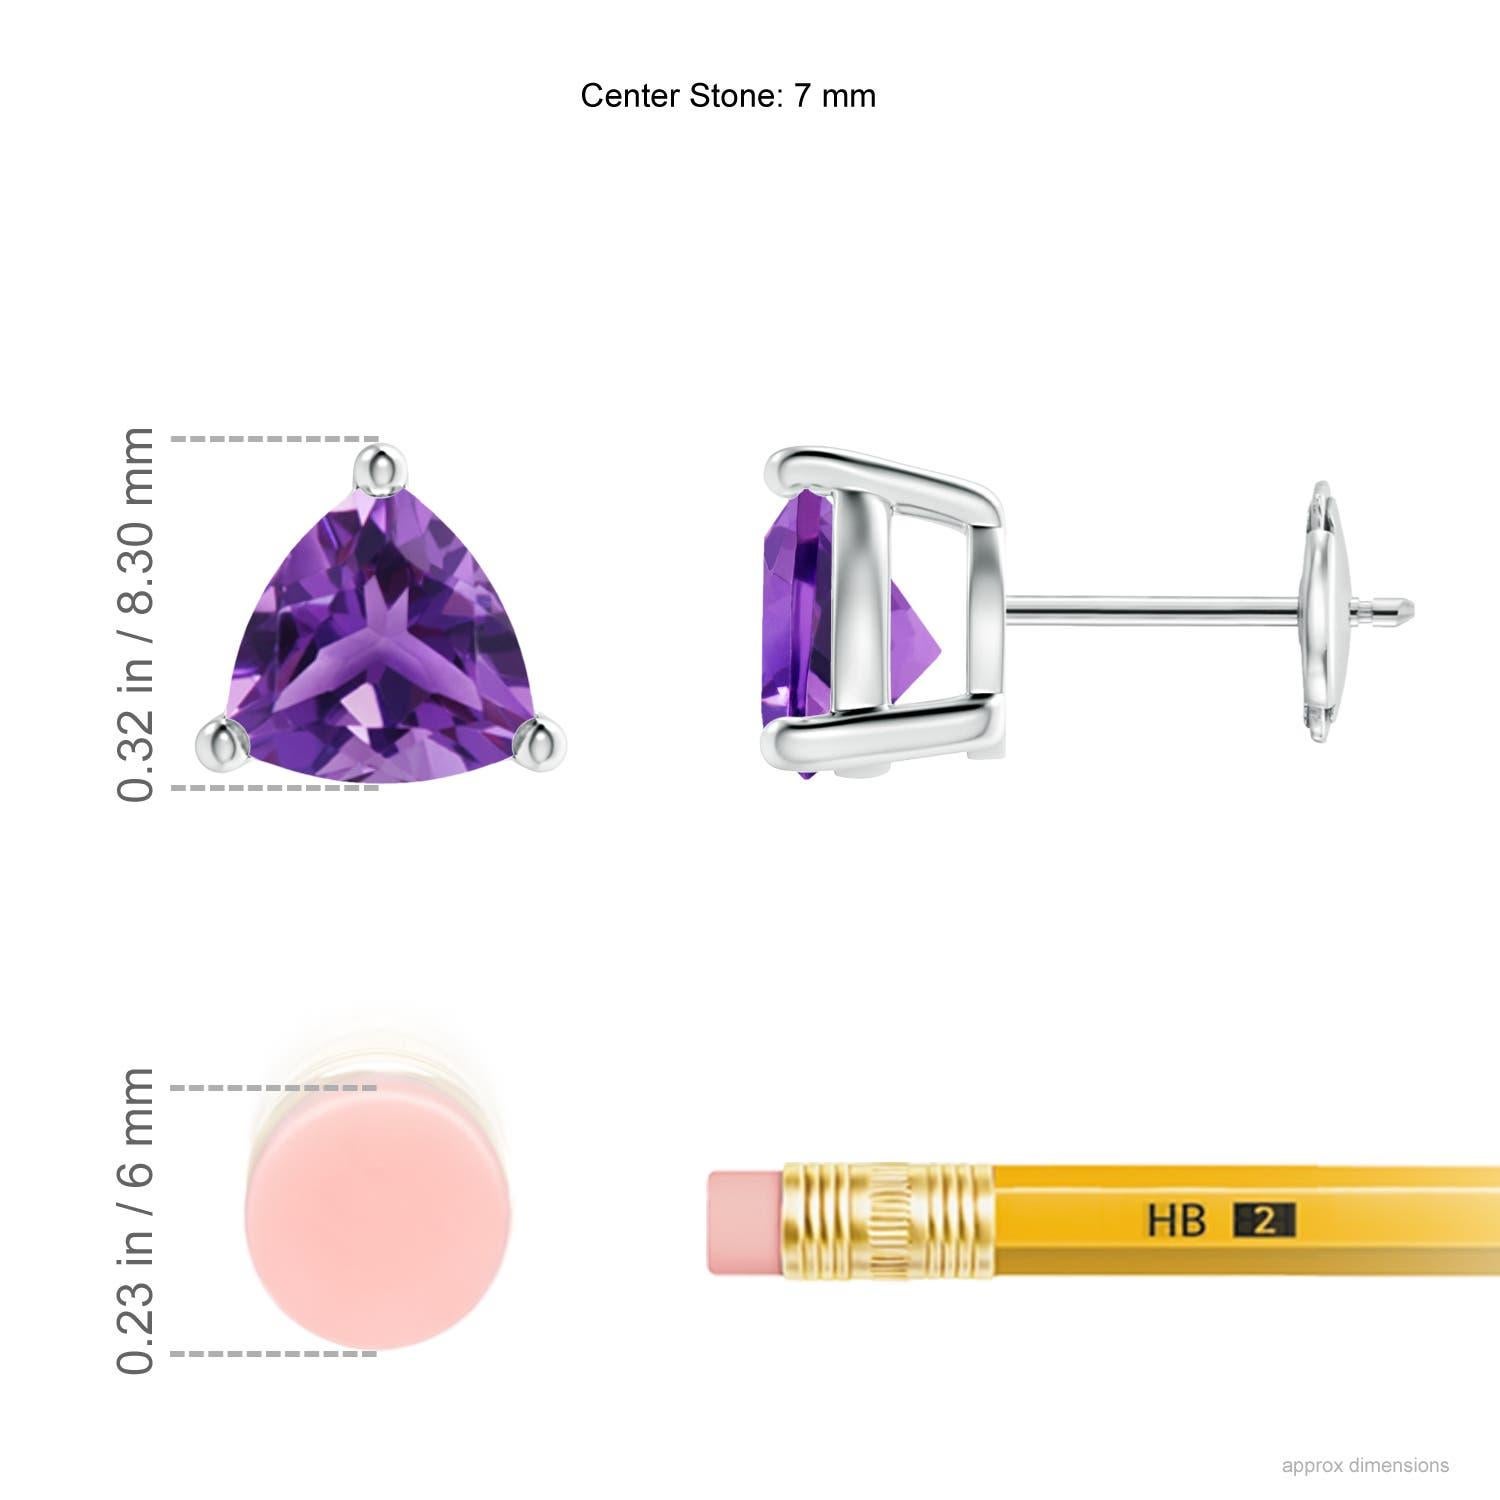 Displaying the royal purple amethysts in a prong setting, these solitaire stud earrings are a pair of enviable beauty. The gemstones are cut in a striking trillion shape and mounted in 14k white gold.